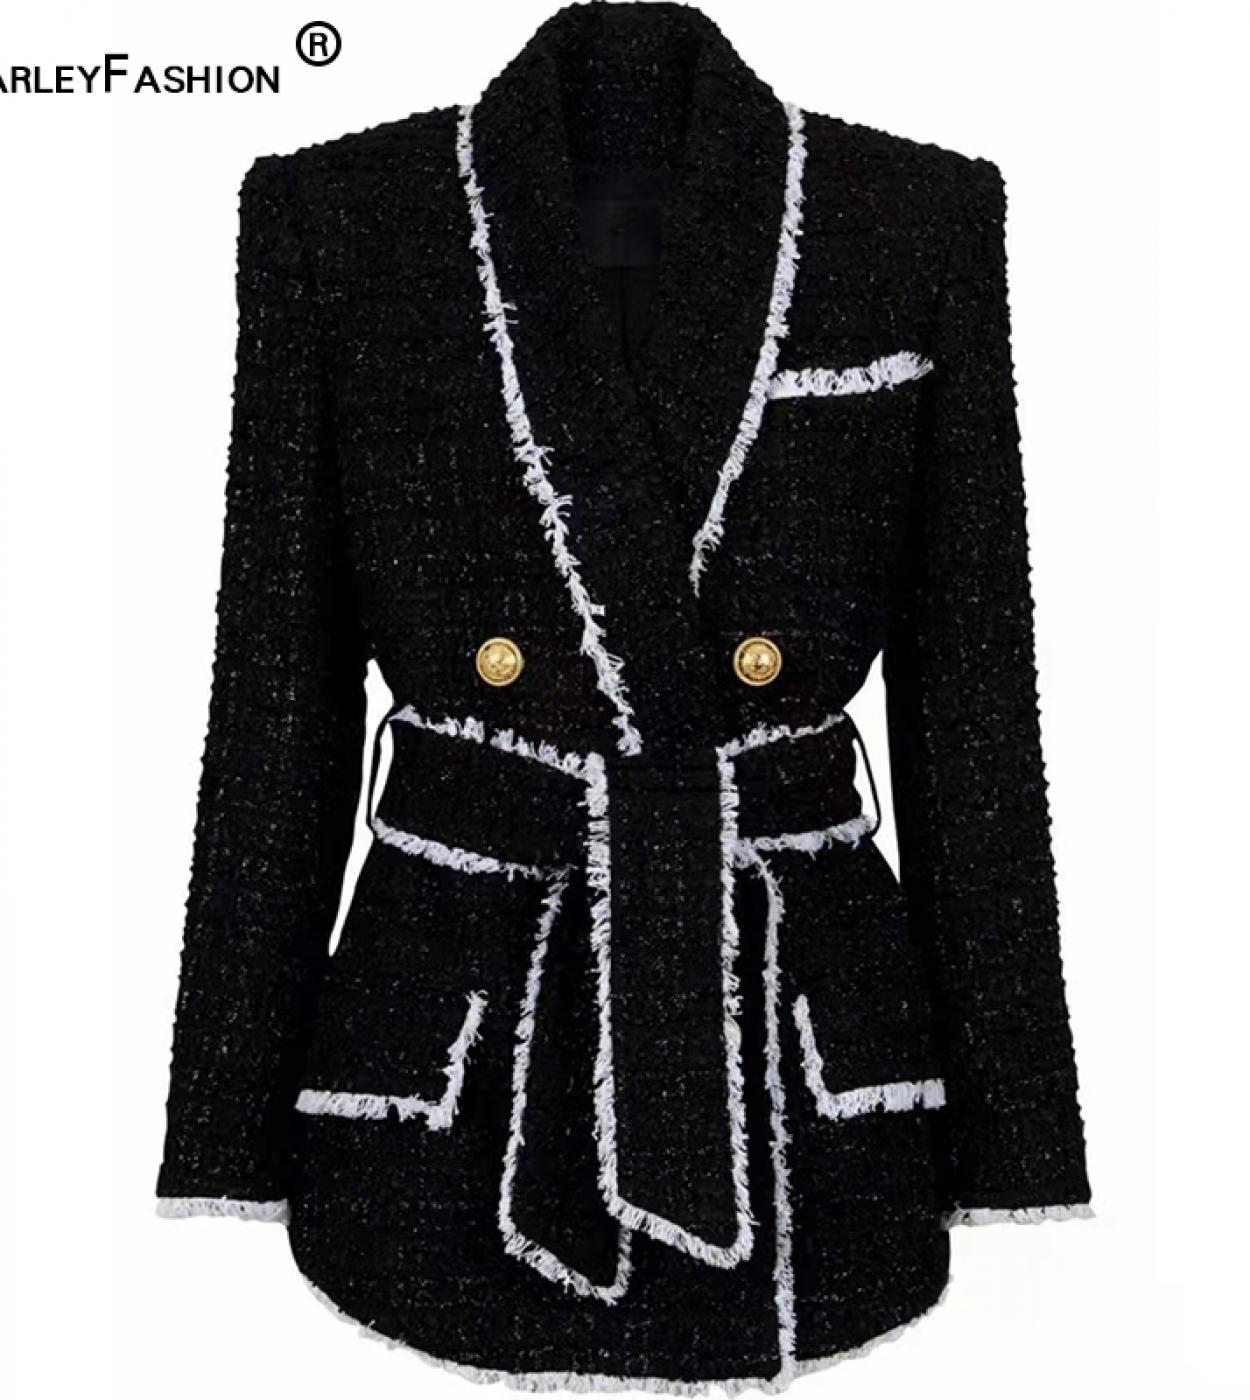 New Winter Shawl Collor Elegant Warm Thick Fabric Woven Tweed Casual Women Bodycon Jacket Quality Blazer With Belt